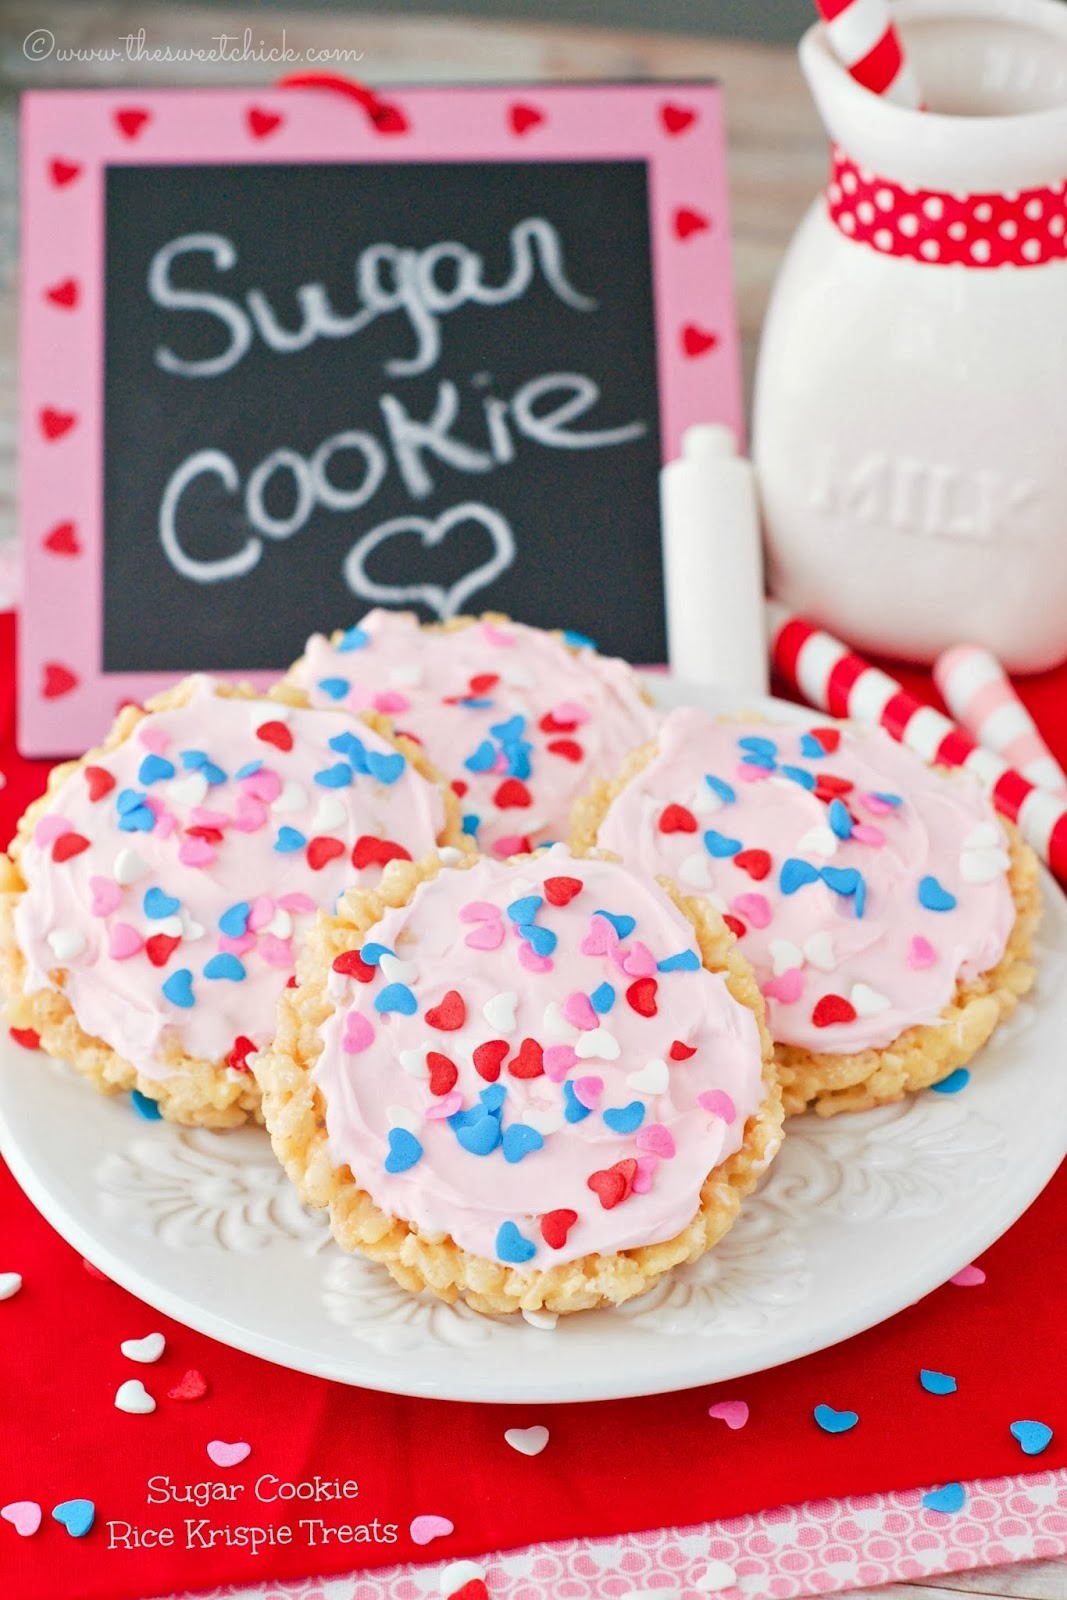 confectionerybliss:  Sugar Cookie Rice Krispie Treats | The Sweet Chick